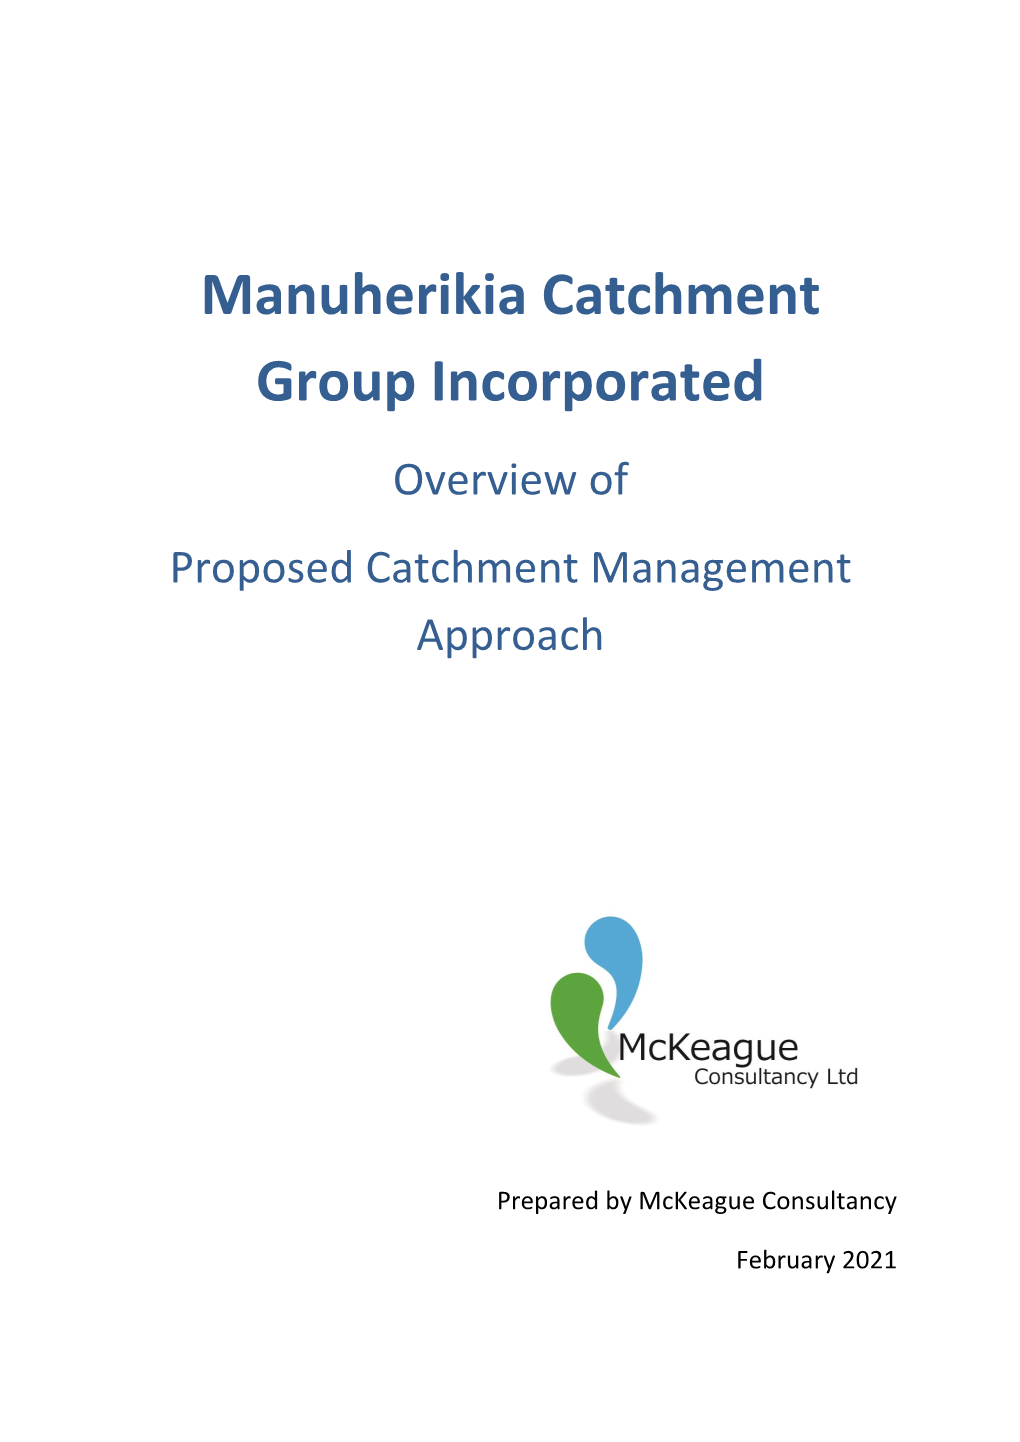 Overview of Proposed Catchment Management Approach